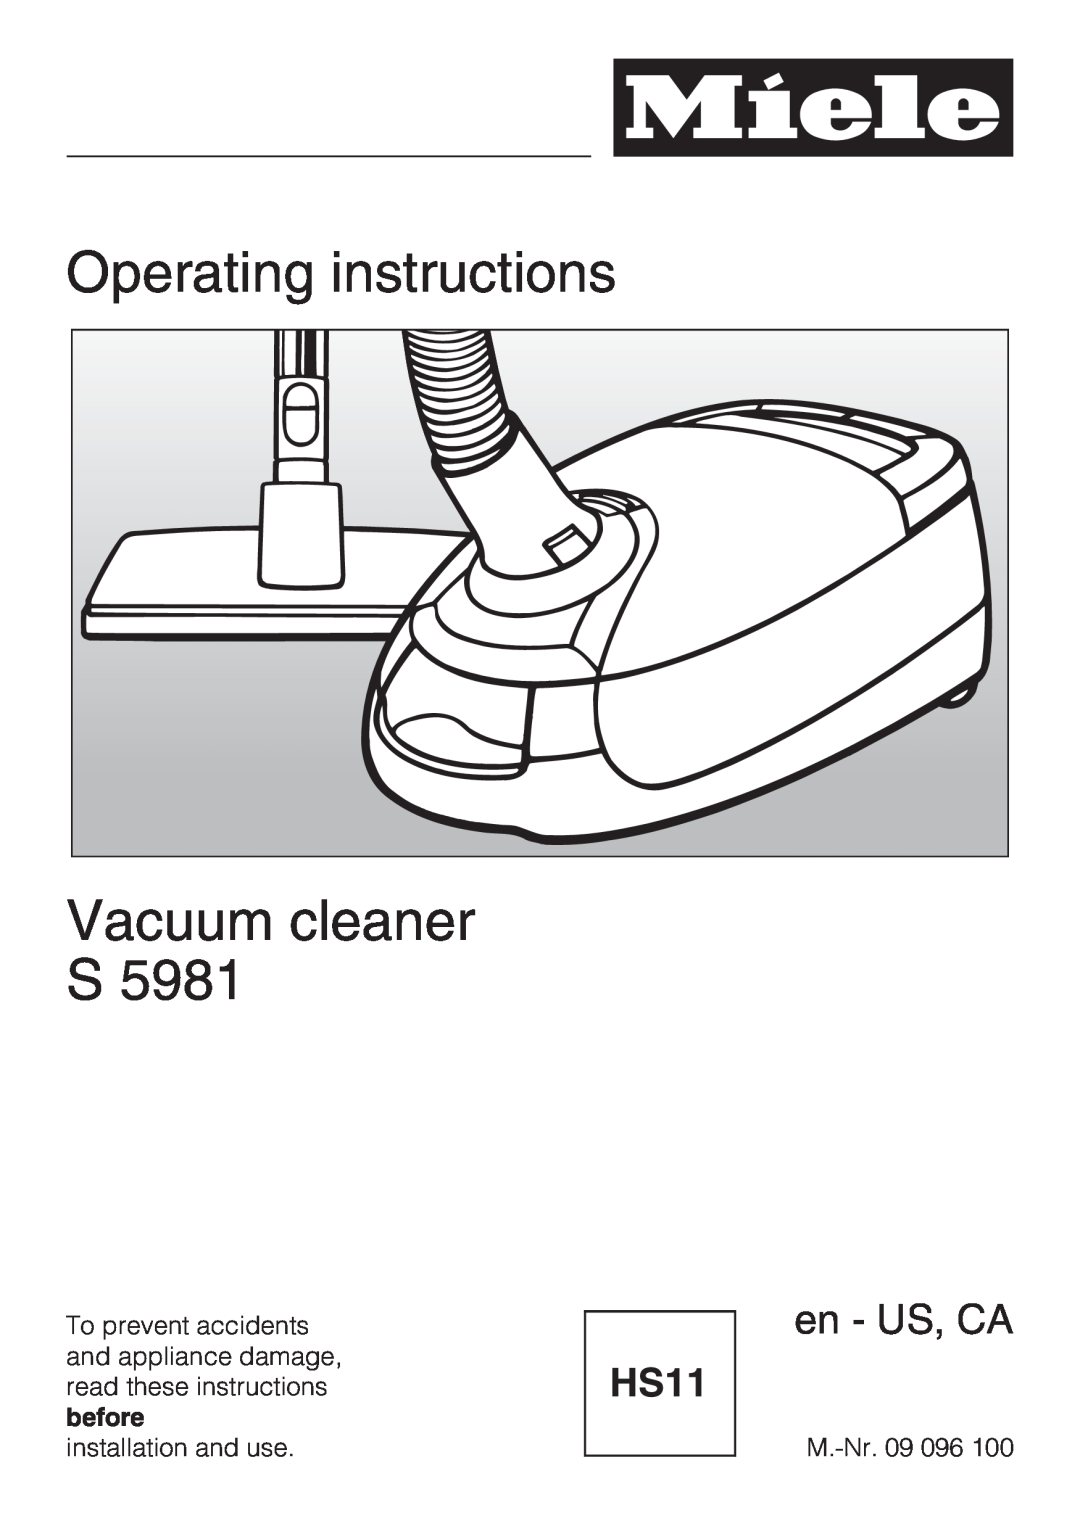 Miele S5981 operating instructions Operating instructions Vacuum cleaner S, en - US, CA 